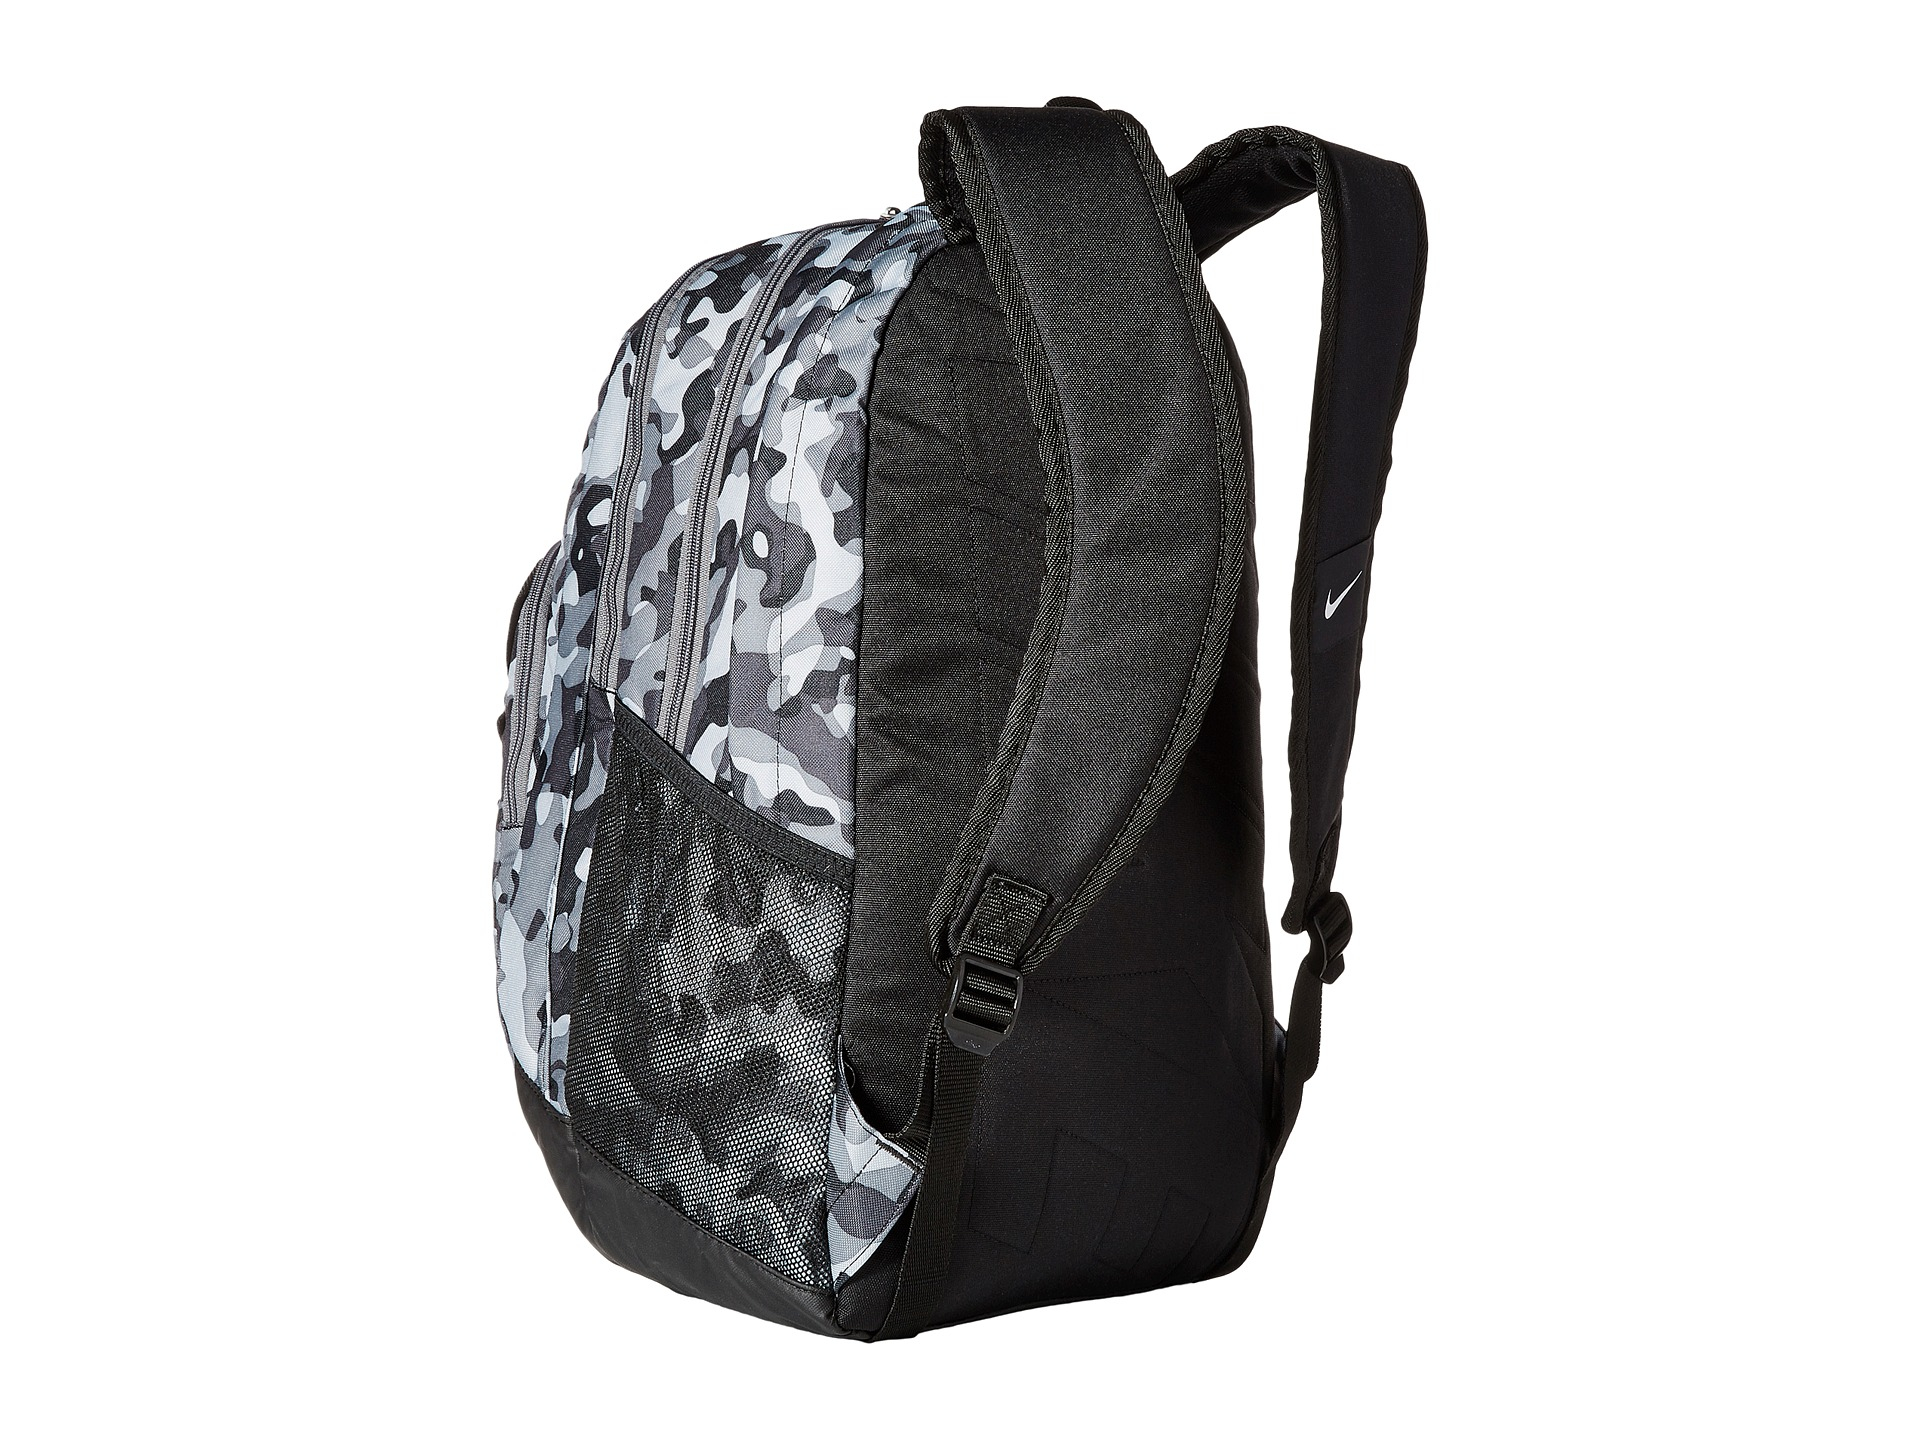 Nike Brasilia 7 Backpack Graphic Xl in Cool Grey/Black/White (Gray) - Lyst